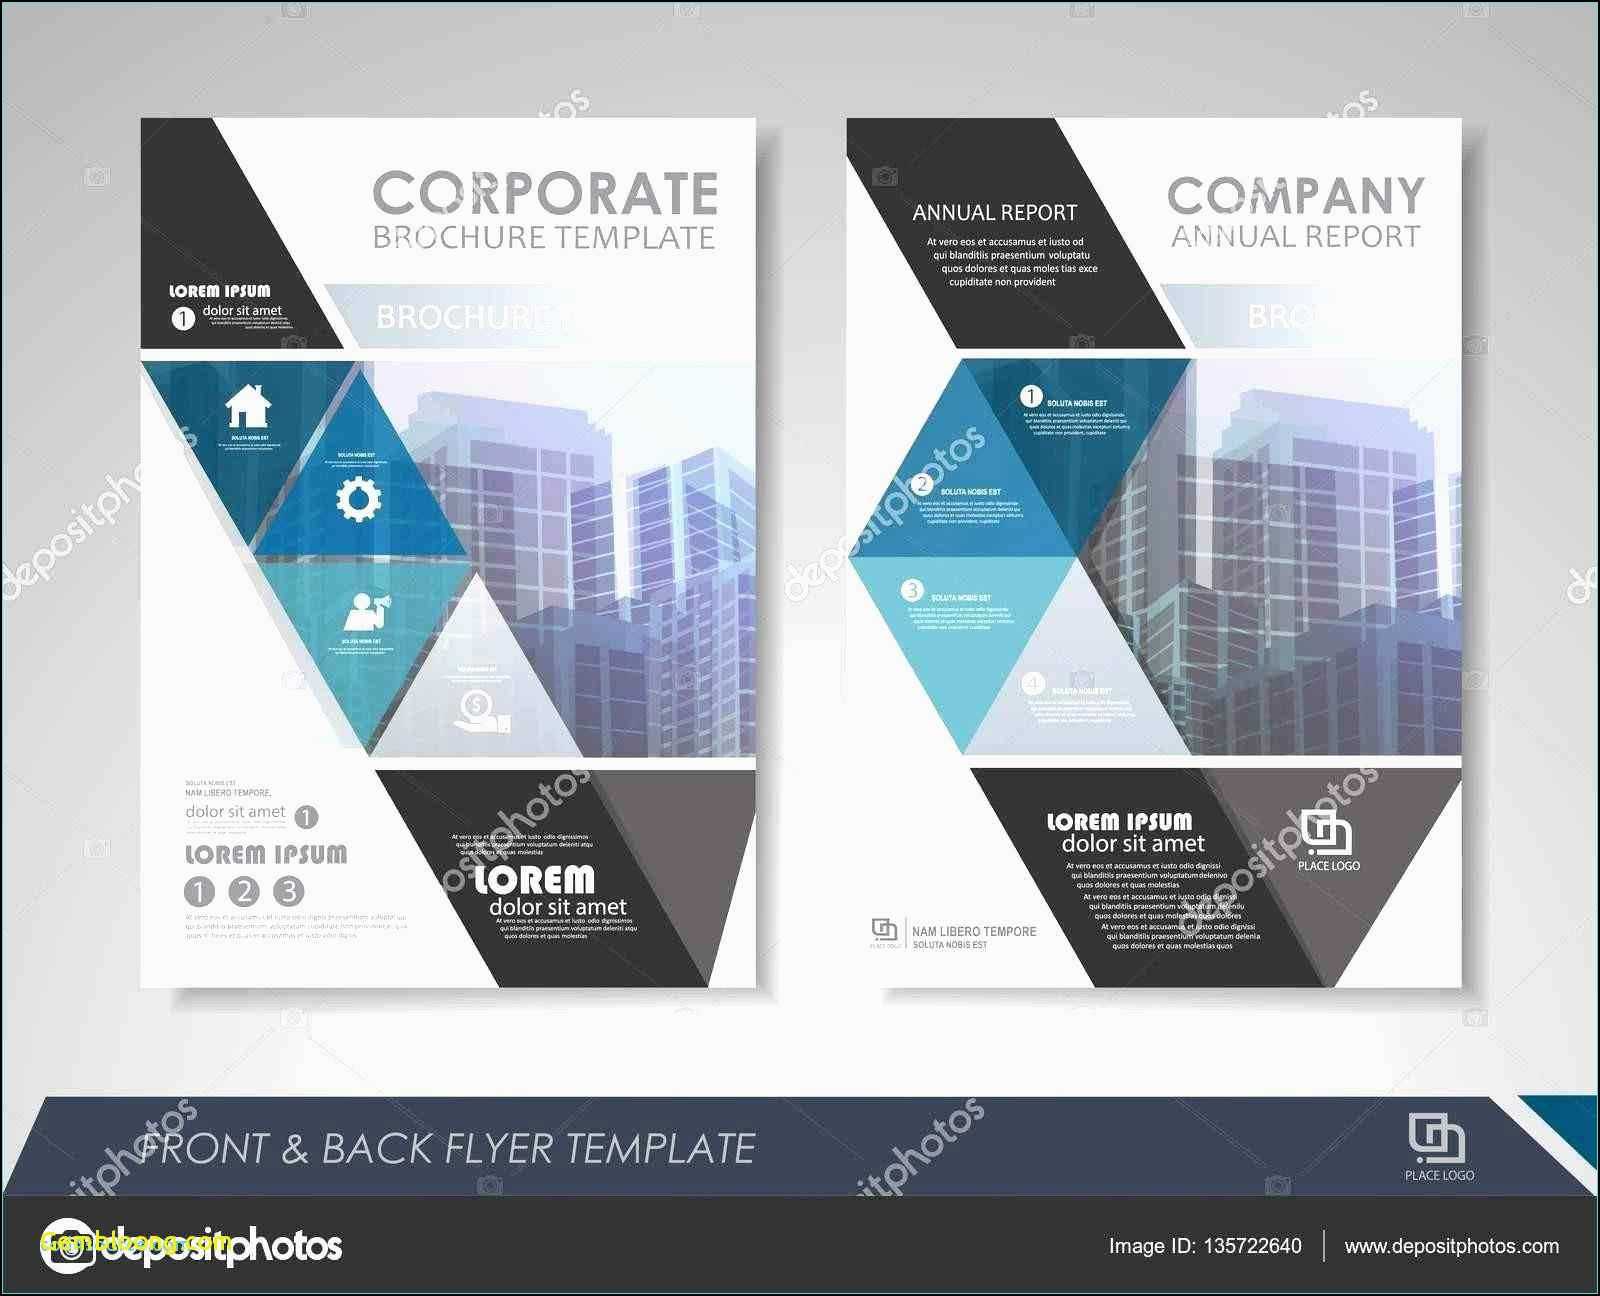 026 In Design Flyer Template Unbelievable Ideas Indesign Throughout Indesign Templates Free Download Brochure